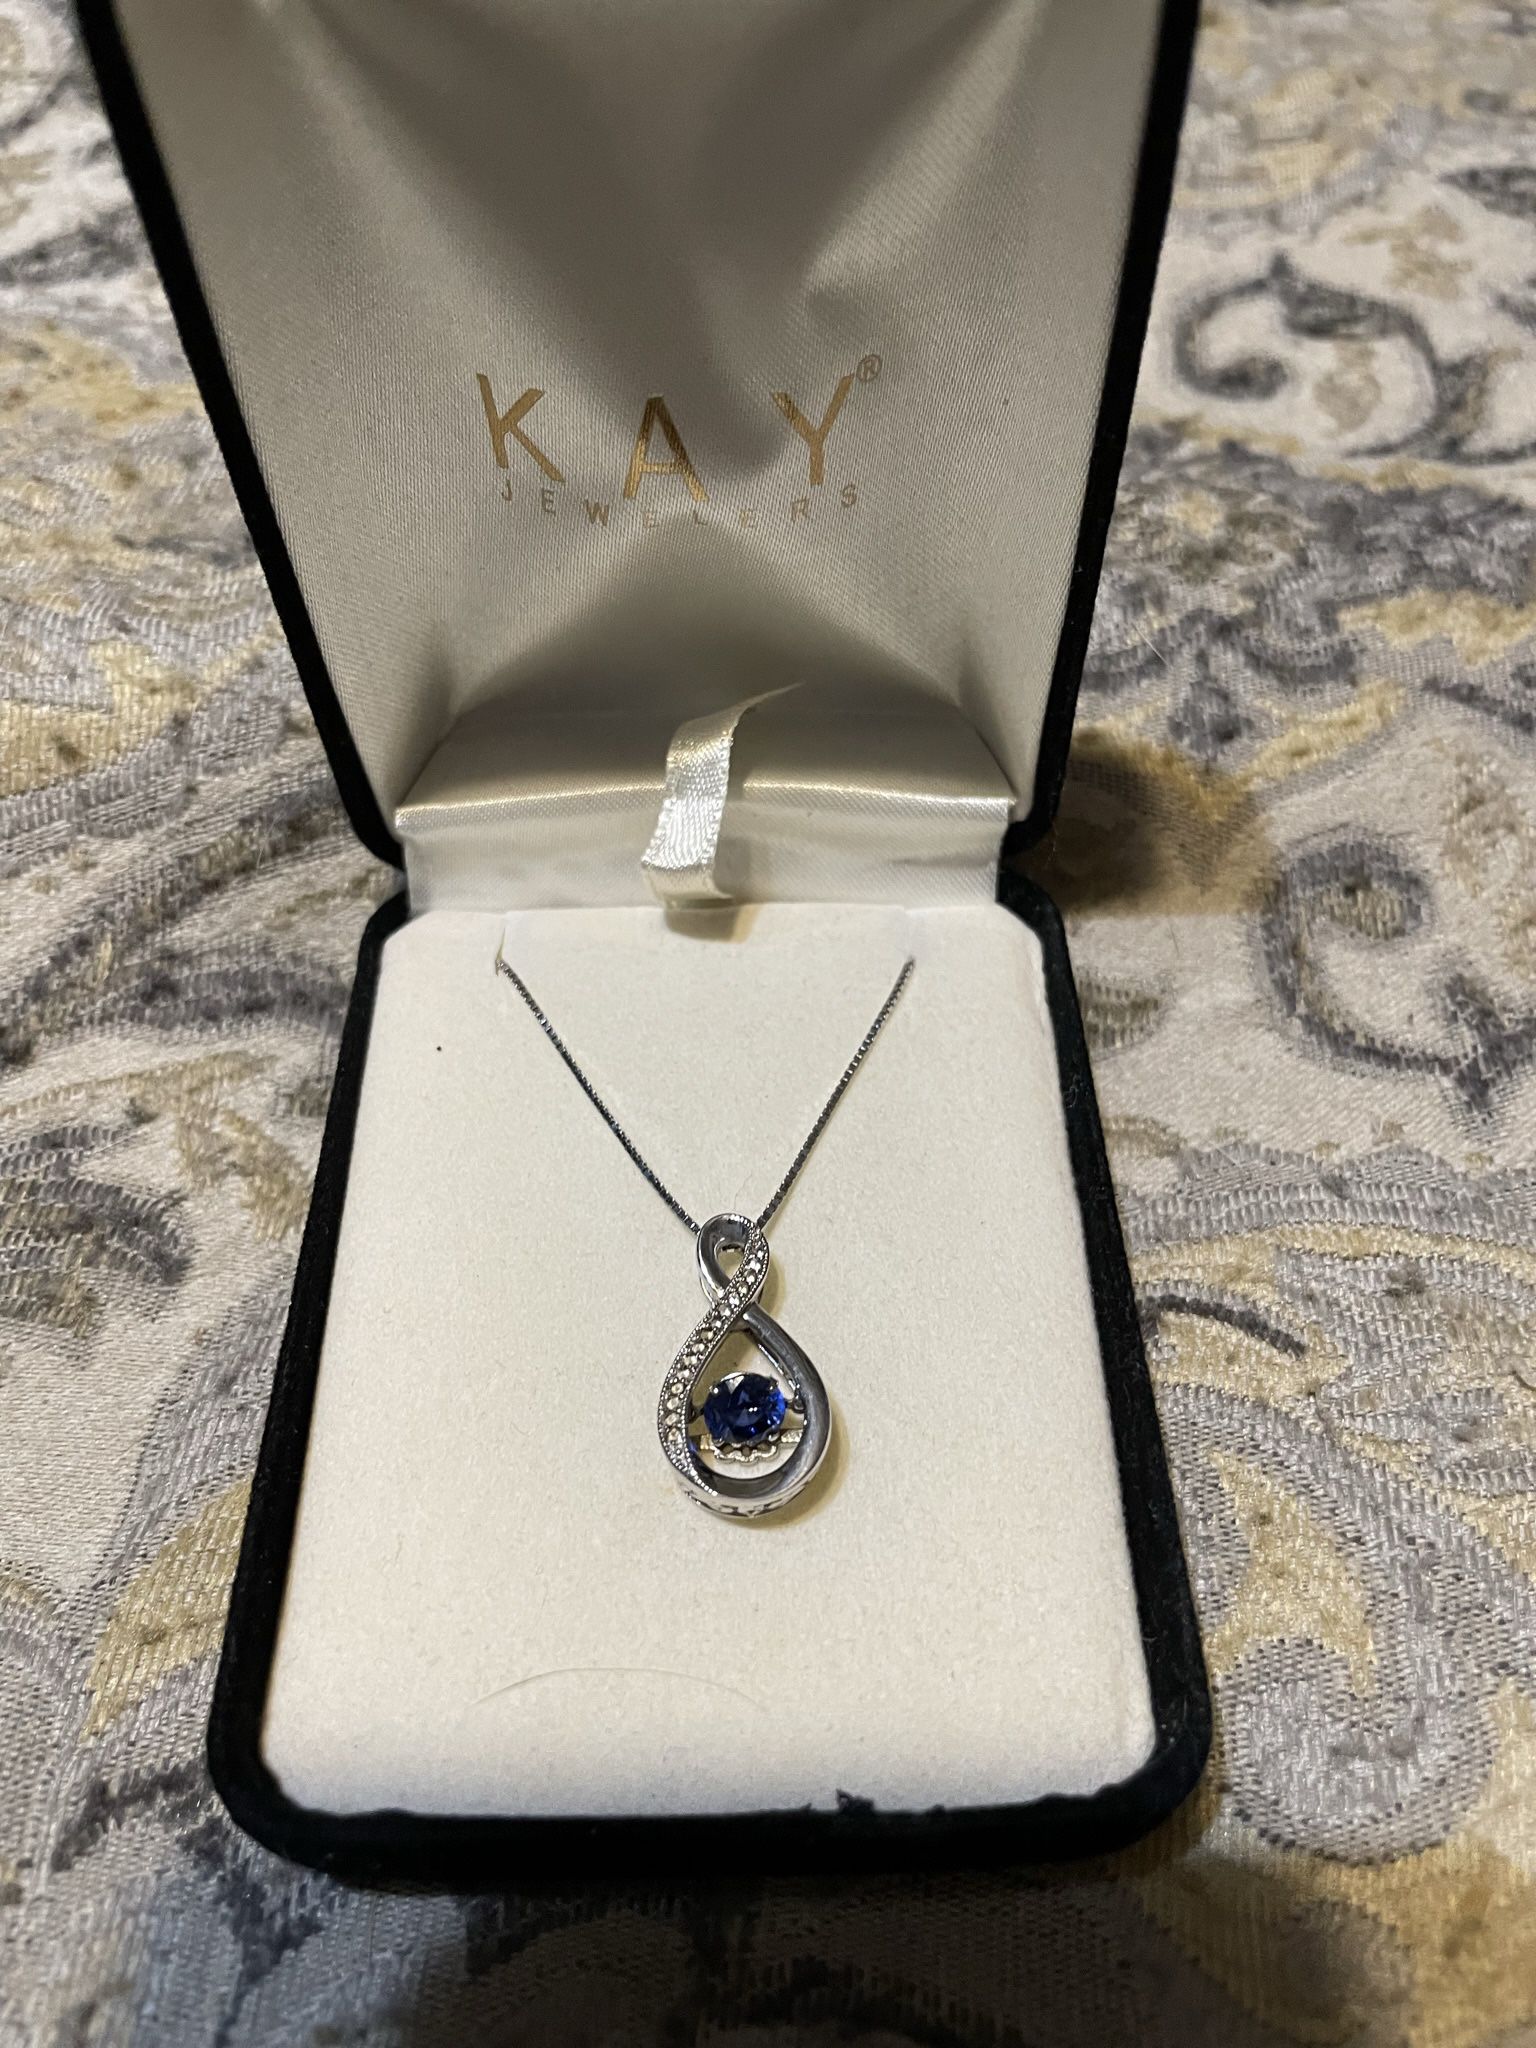 Kay Jewelers Silver Sapphire Necklace